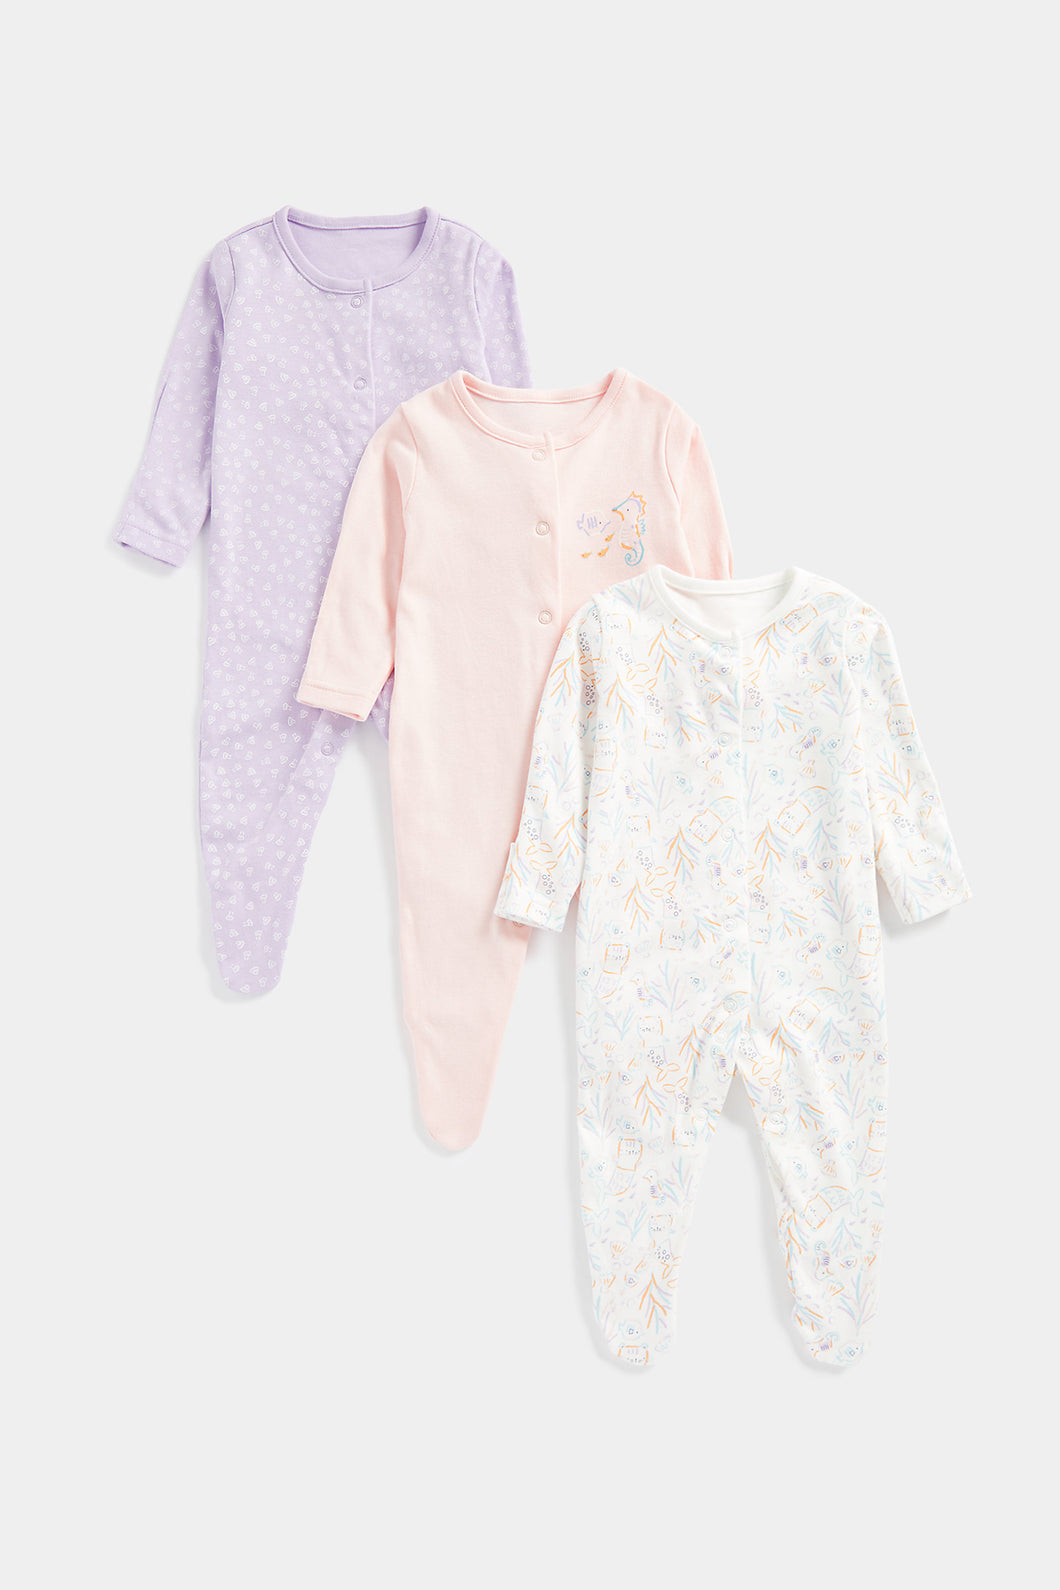 Mothercare Under-the-Sea Sleepsuits - 3 Pack